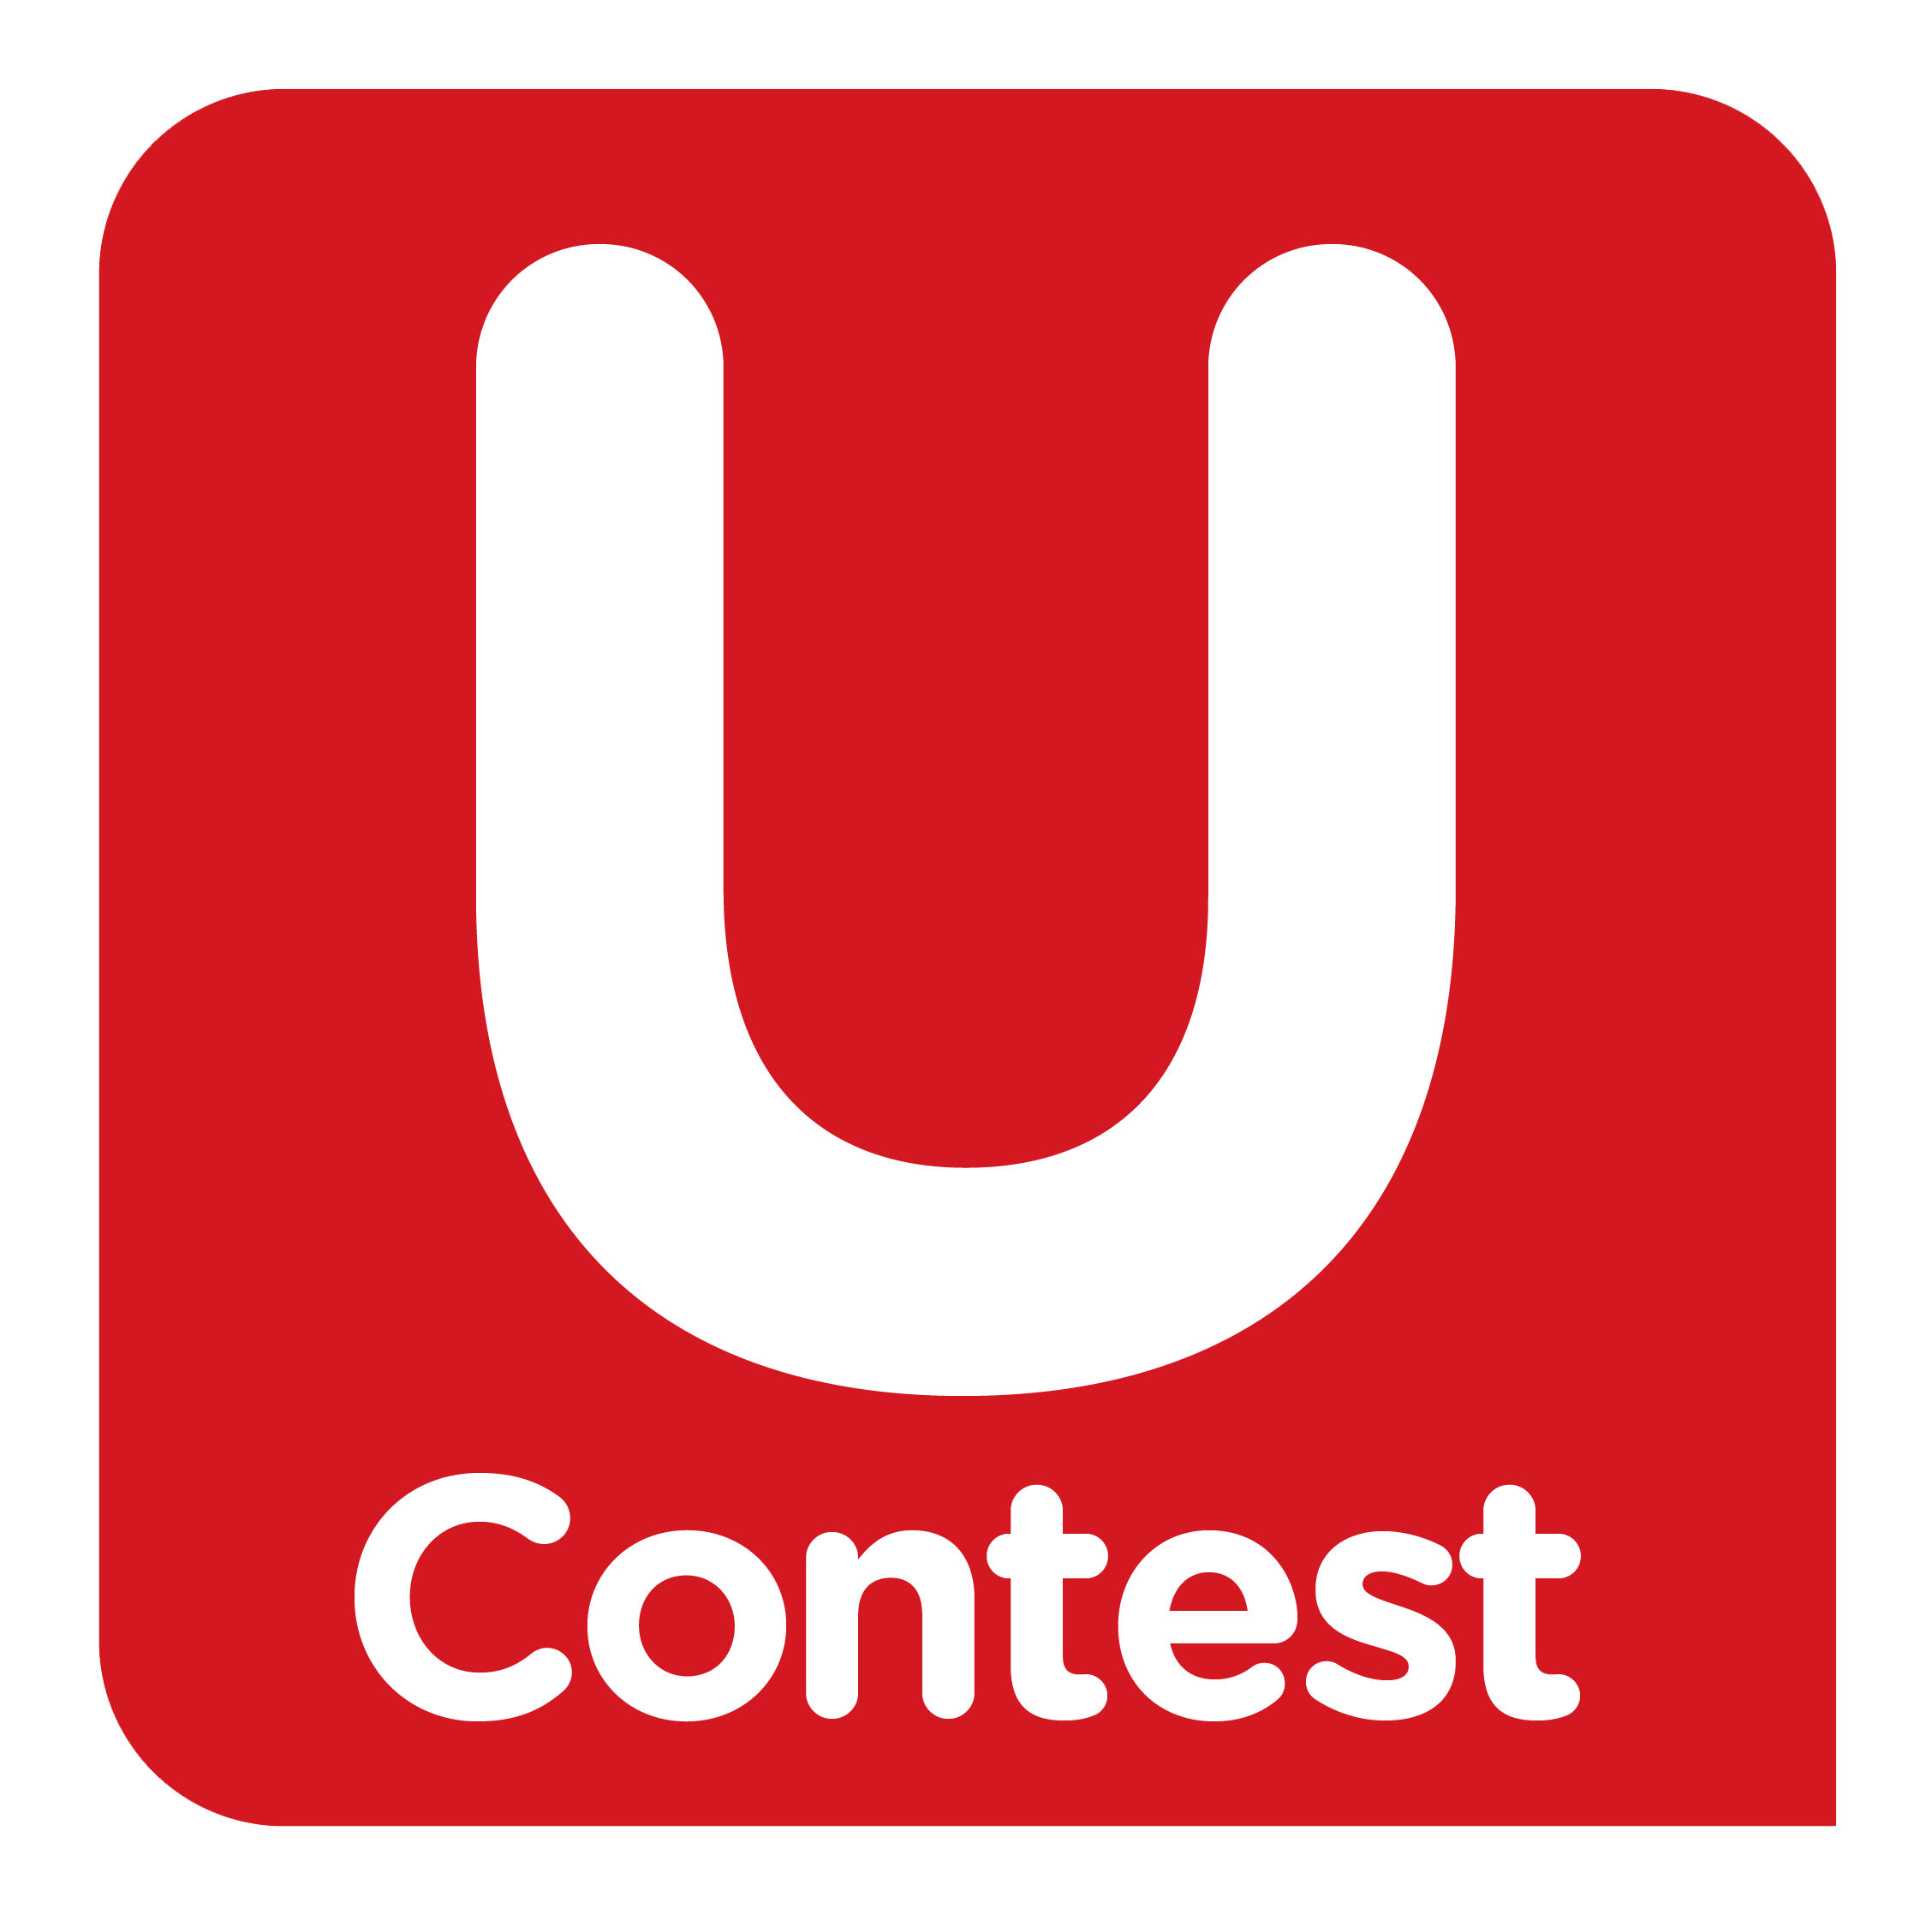 UContest is an online competition platform that enables you to create or join online competitions instantly